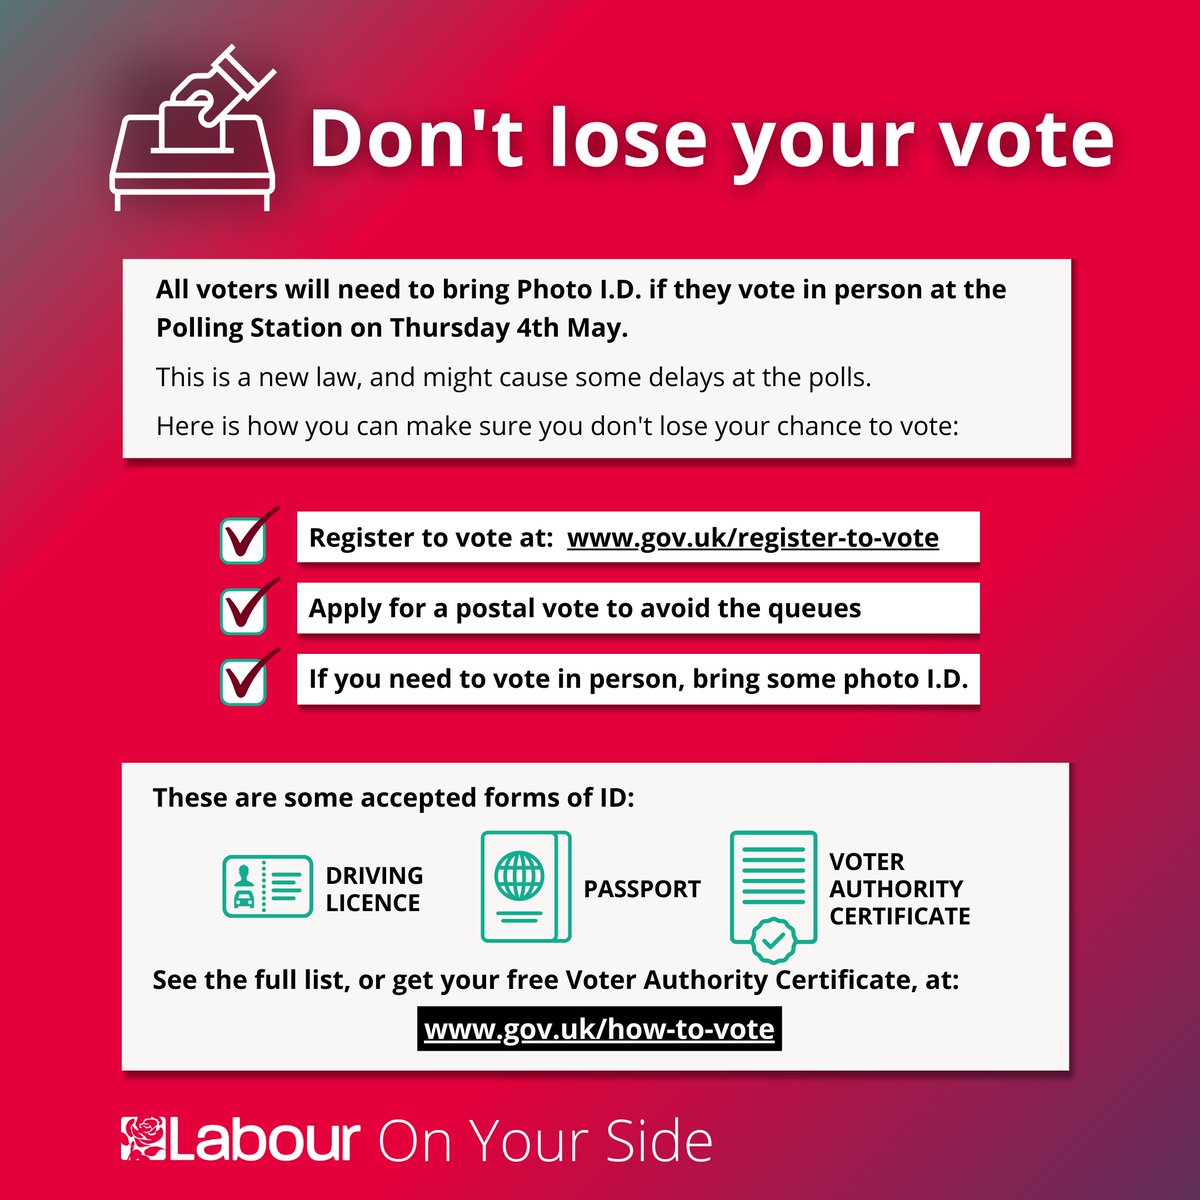 The Tories' new voting law risks costing millions their chance to vote, as they try to desperately cling to office.

Keep your voice by registering for a free postal vote before April 17th.
postalvote.labour.org.uk

#VoterID #VoterSupression #democracy #ToryCorruption